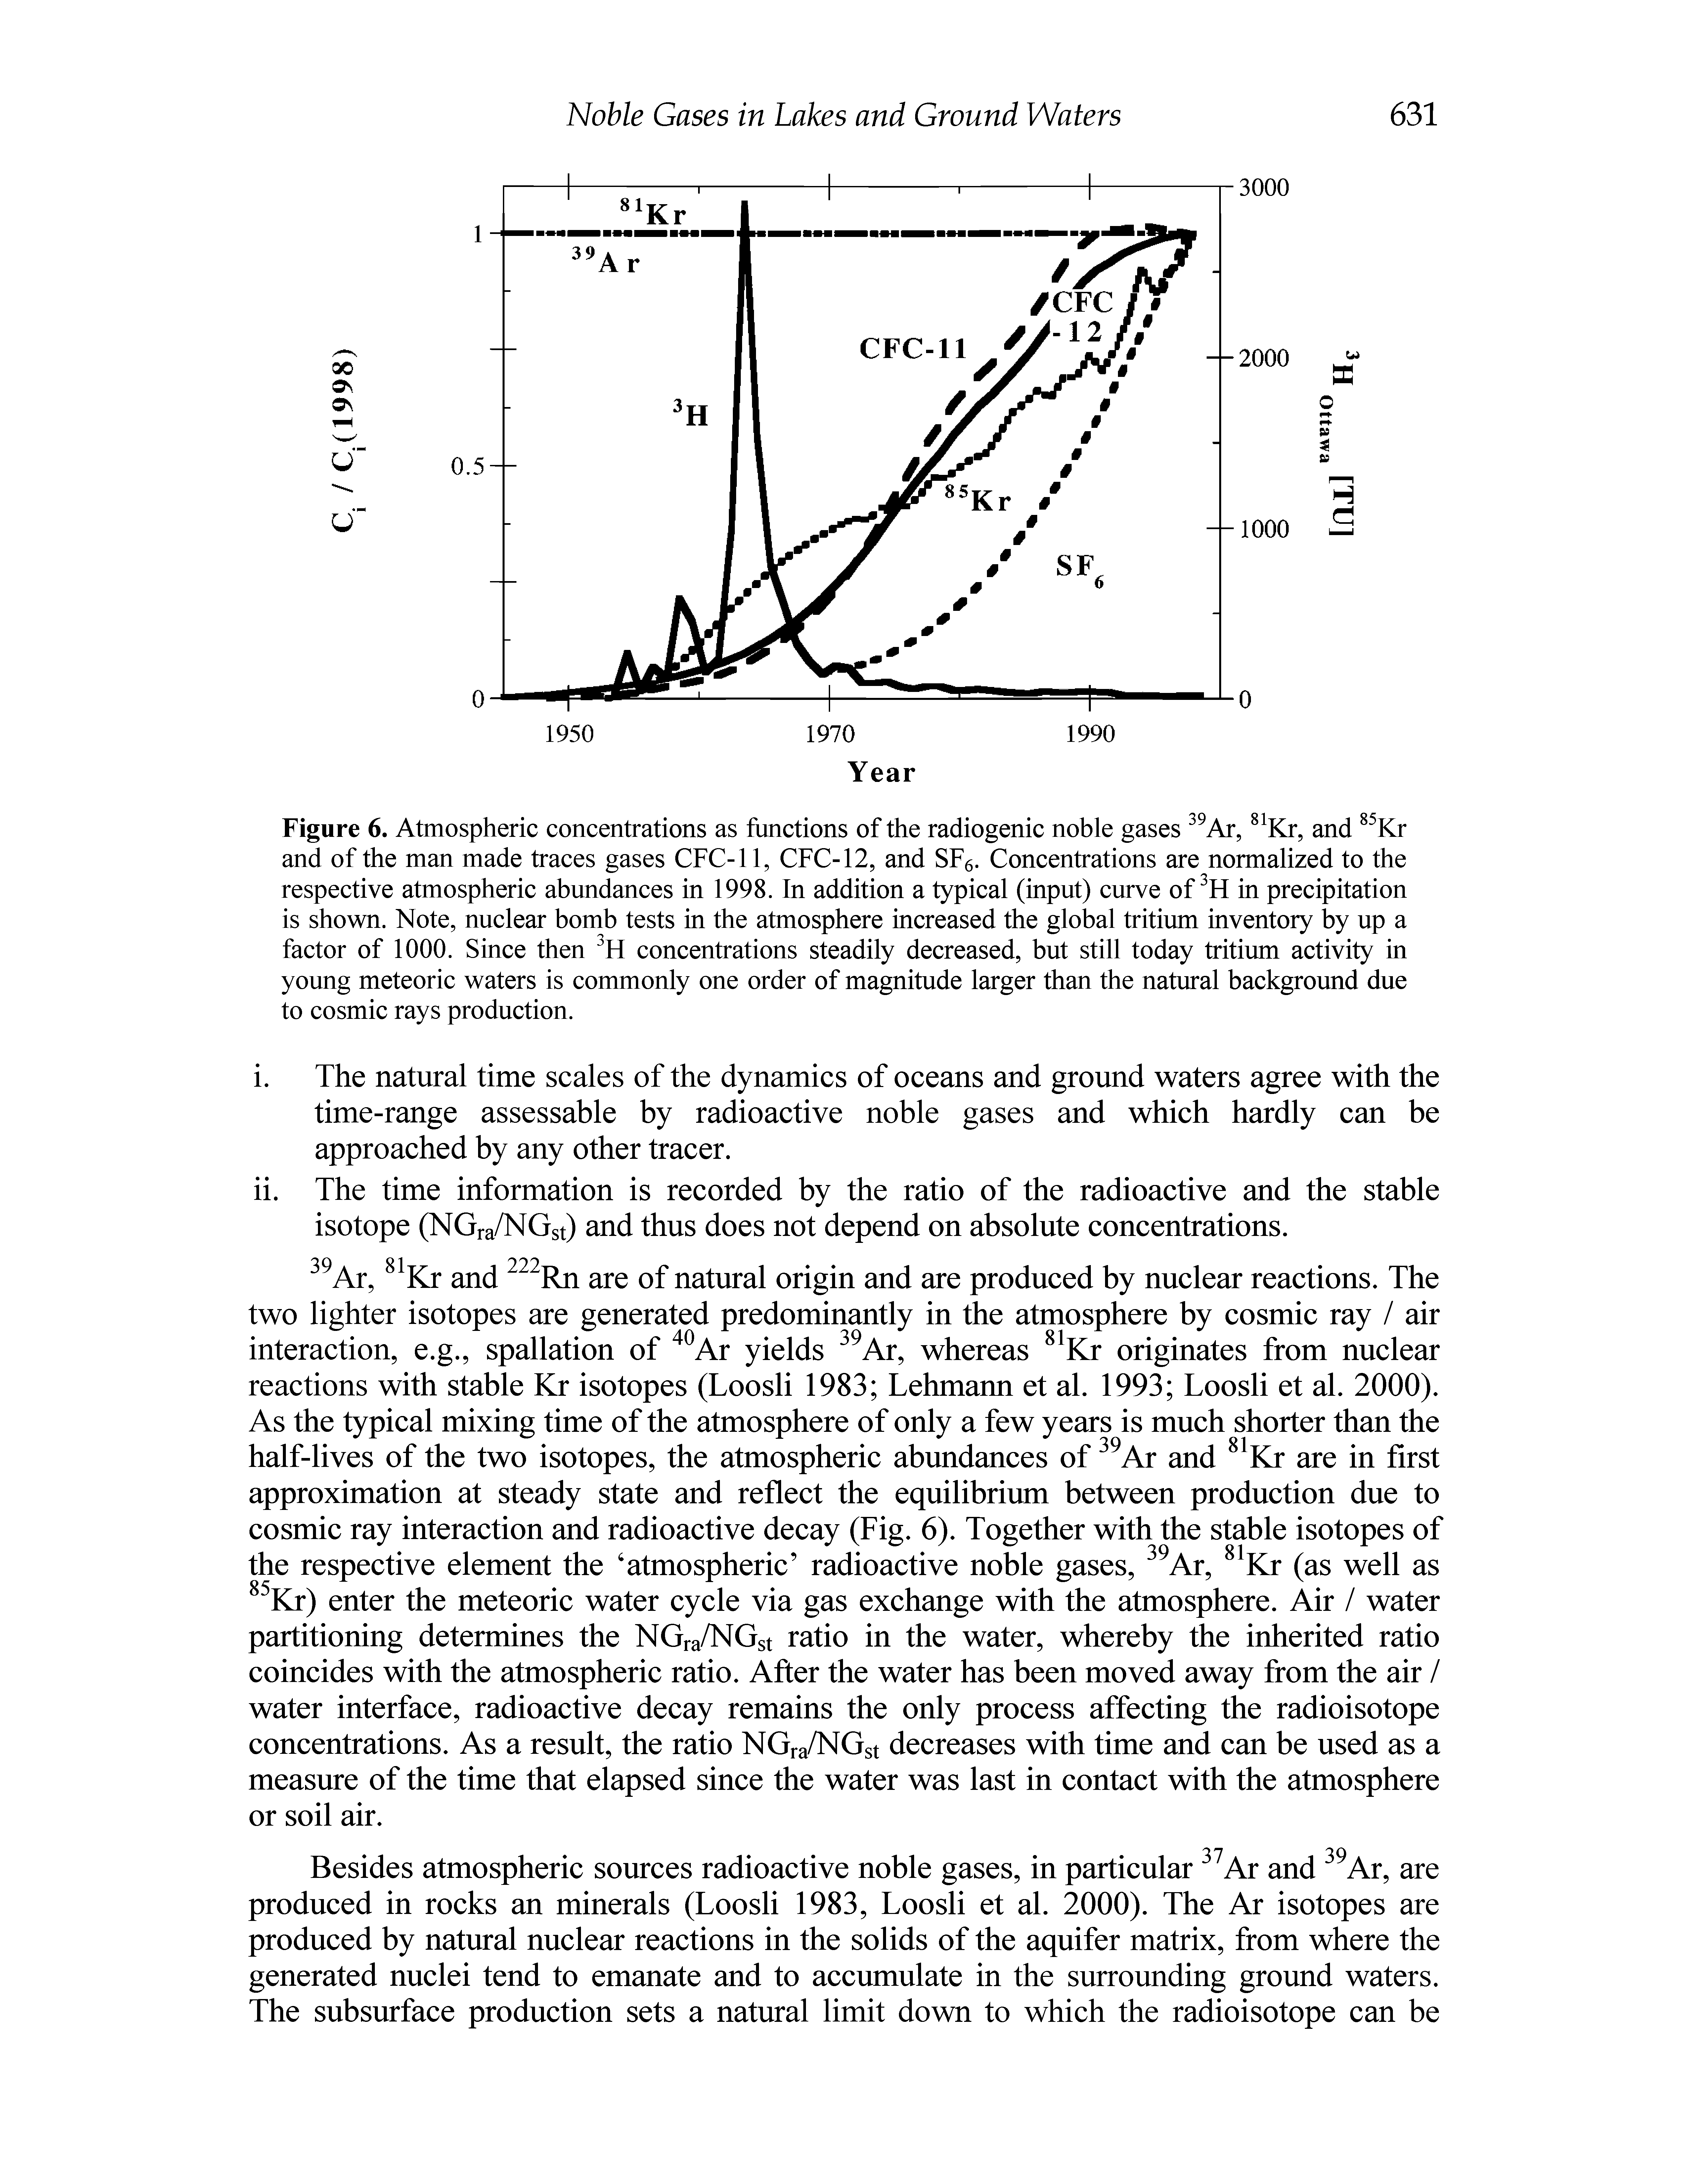 Figure 6. Atmospheric concentrations as functions of the radiogenic noble gases Ar, Kr, and Kr and of the man made traces gases CFC-11, CFC-12, and SFe. Concentrations are normalized to the respective atmospheric abundances in 1998. In addition a typical (input) curve of in precipitation is shown. Note, nuclear bomb tests in the atmosphere increased the global tritium inventory by up a factor of 1000. Since then concentrations steadily decreased, but still today tritium activity in young meteoric waters is commonly one order of magnitude larger than the natural background due to cosmic rays production.